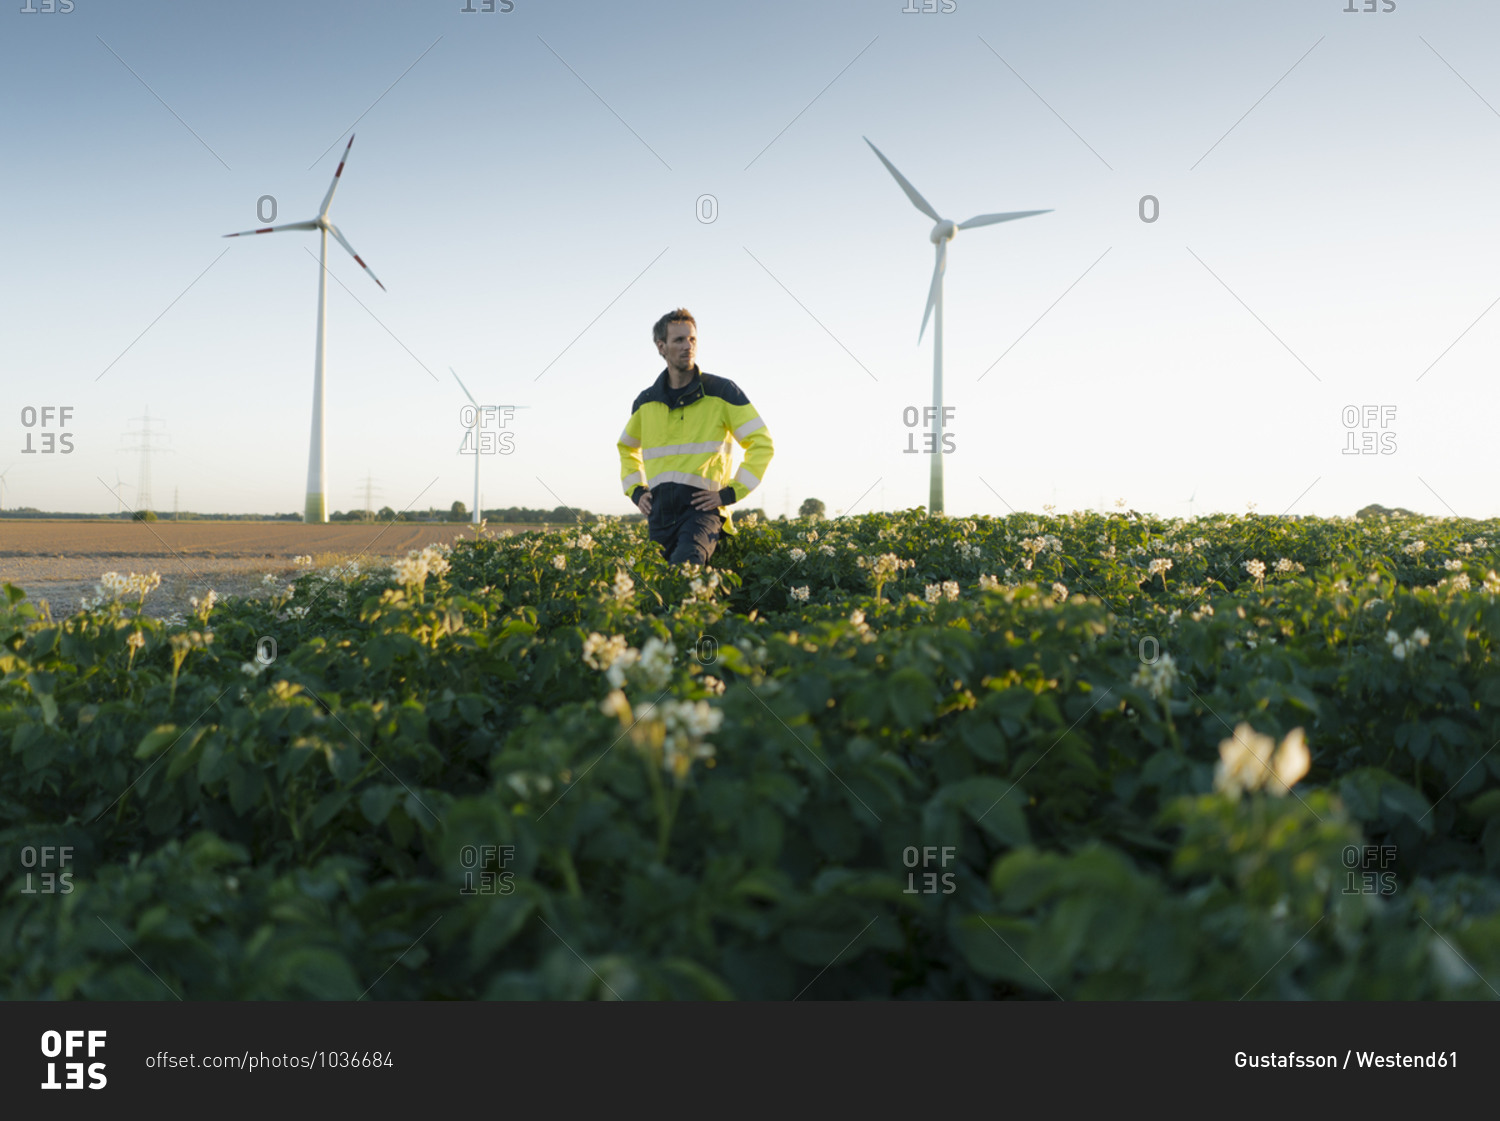 Engineer standing in a field at a wind farm